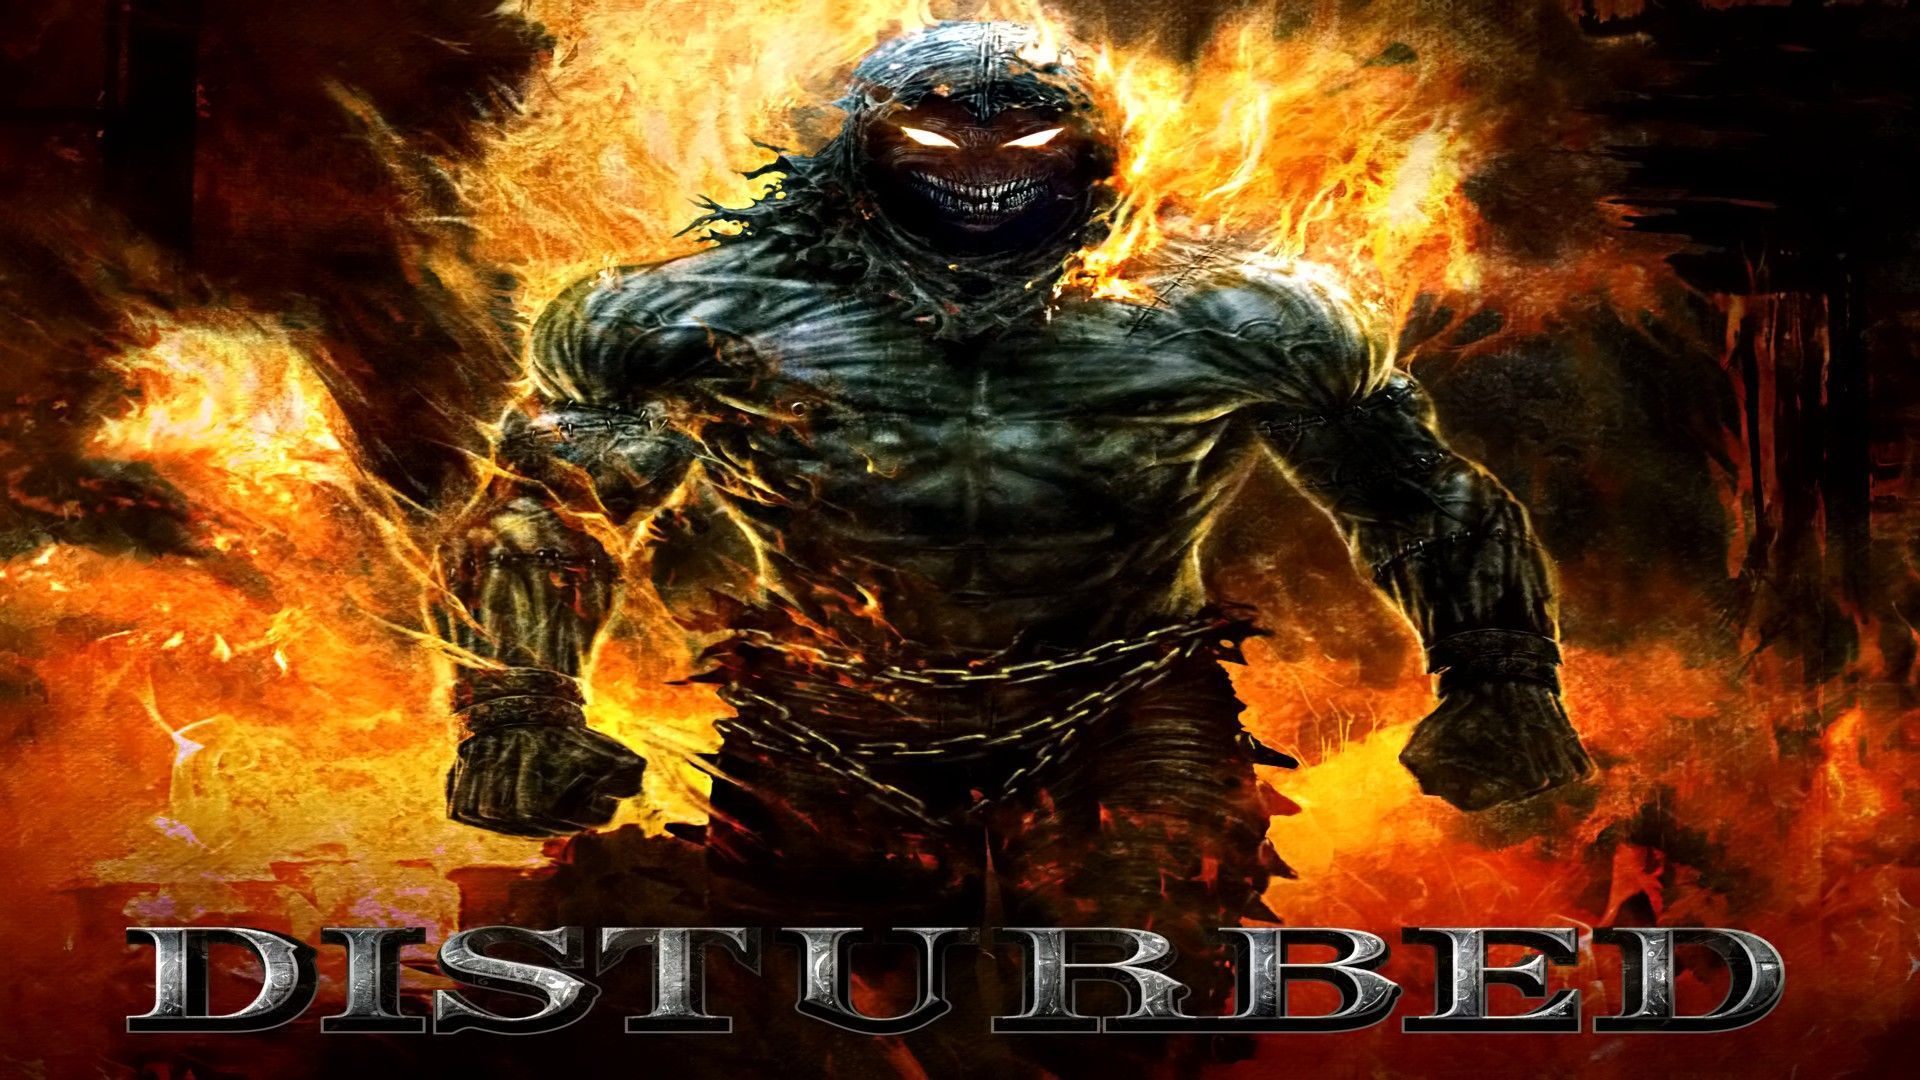 Image For Disturbed The Guy Wallpaper Indestructible